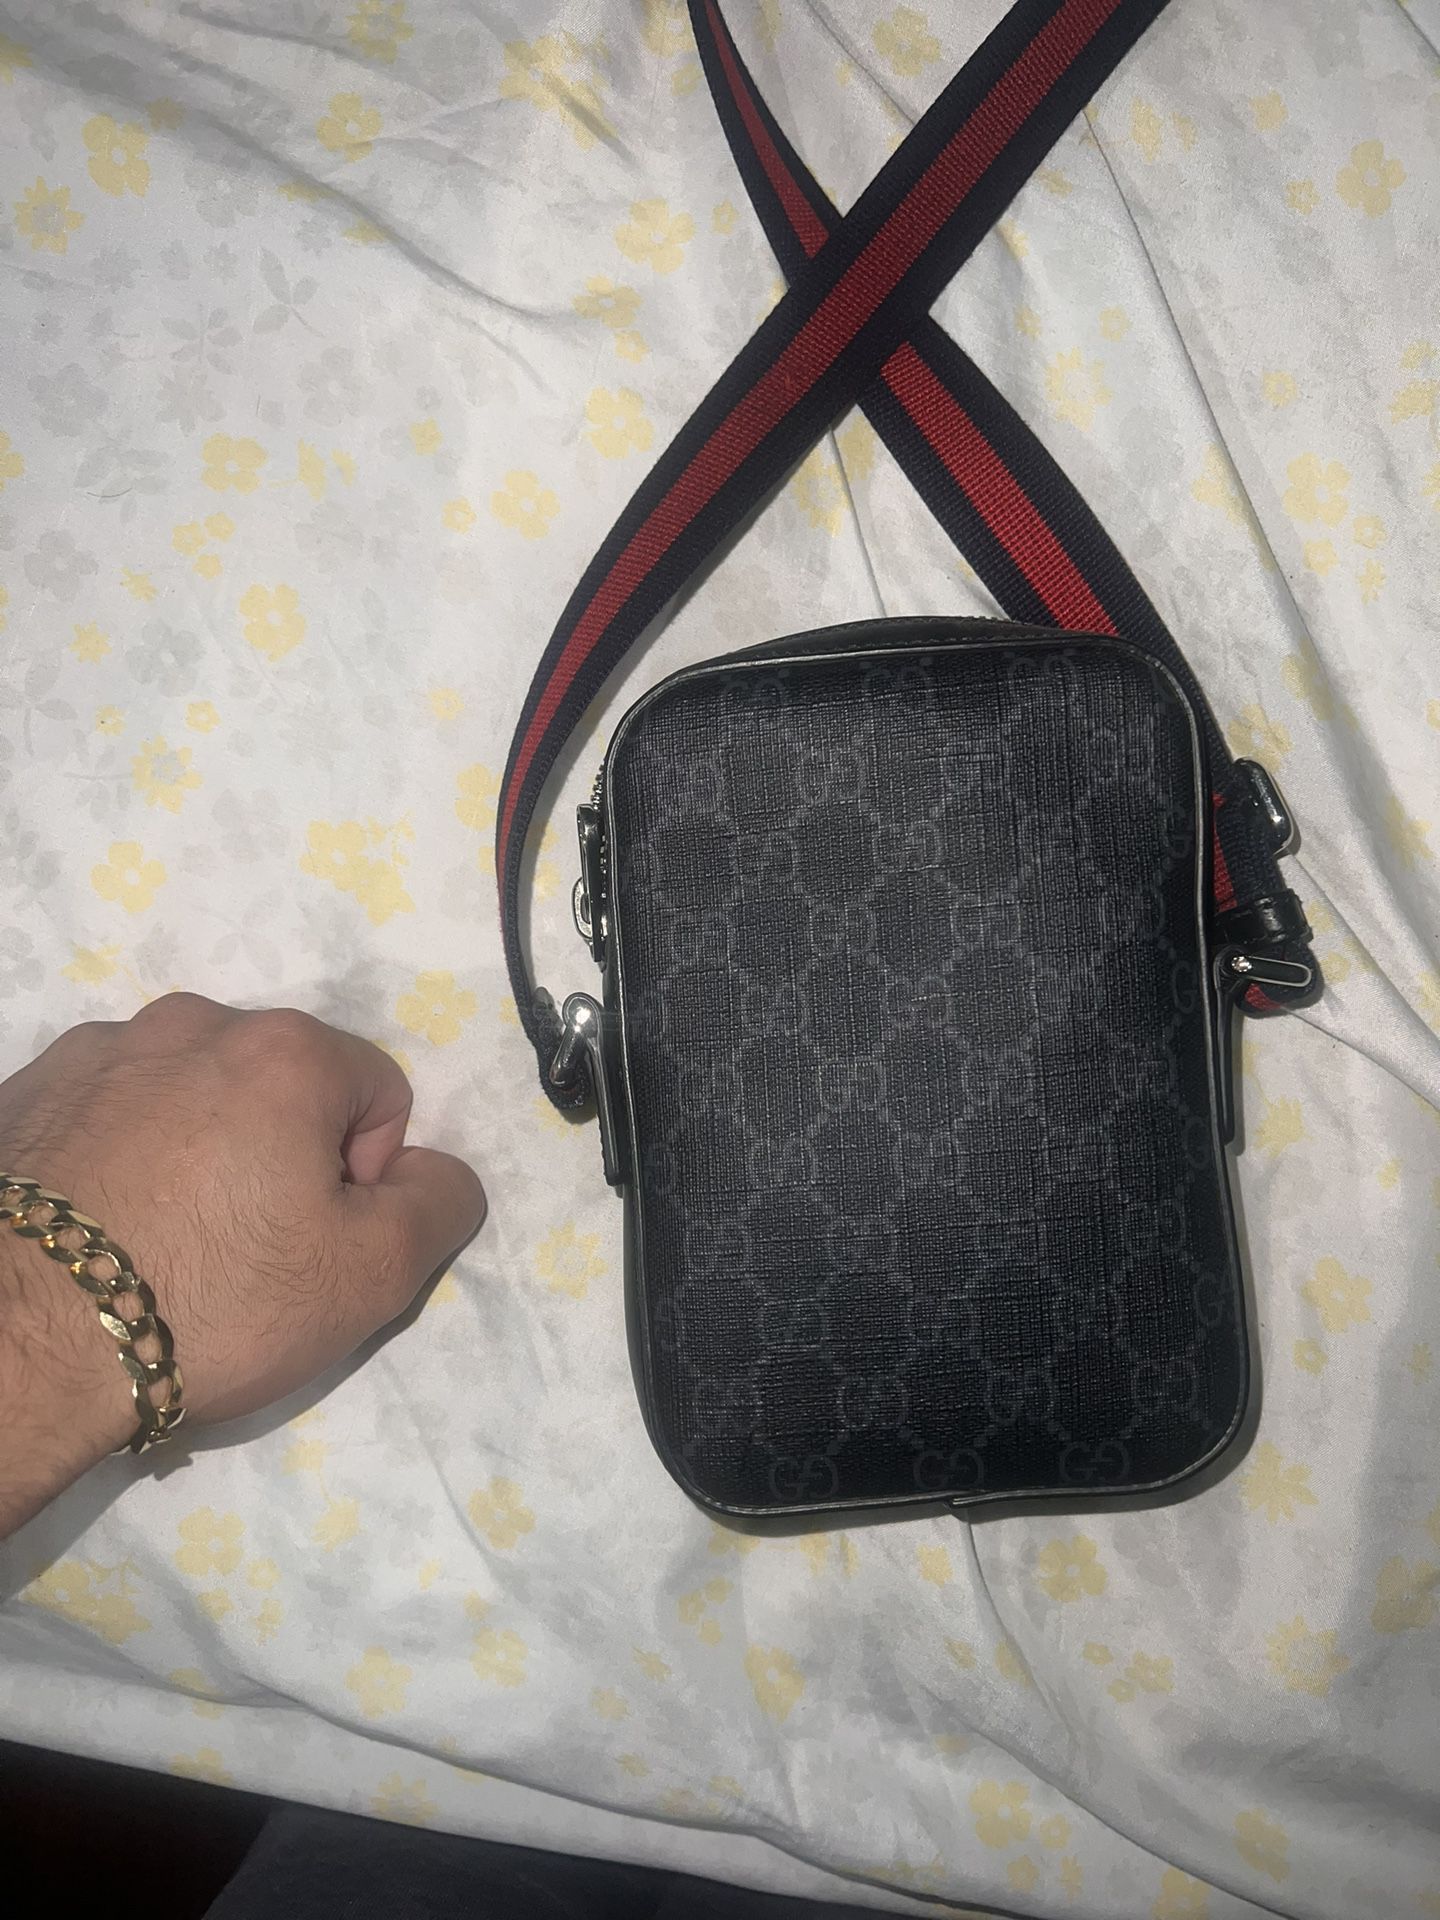 GUCCI MESSENGER BAG for Sale in Los Angeles, CA - OfferUp